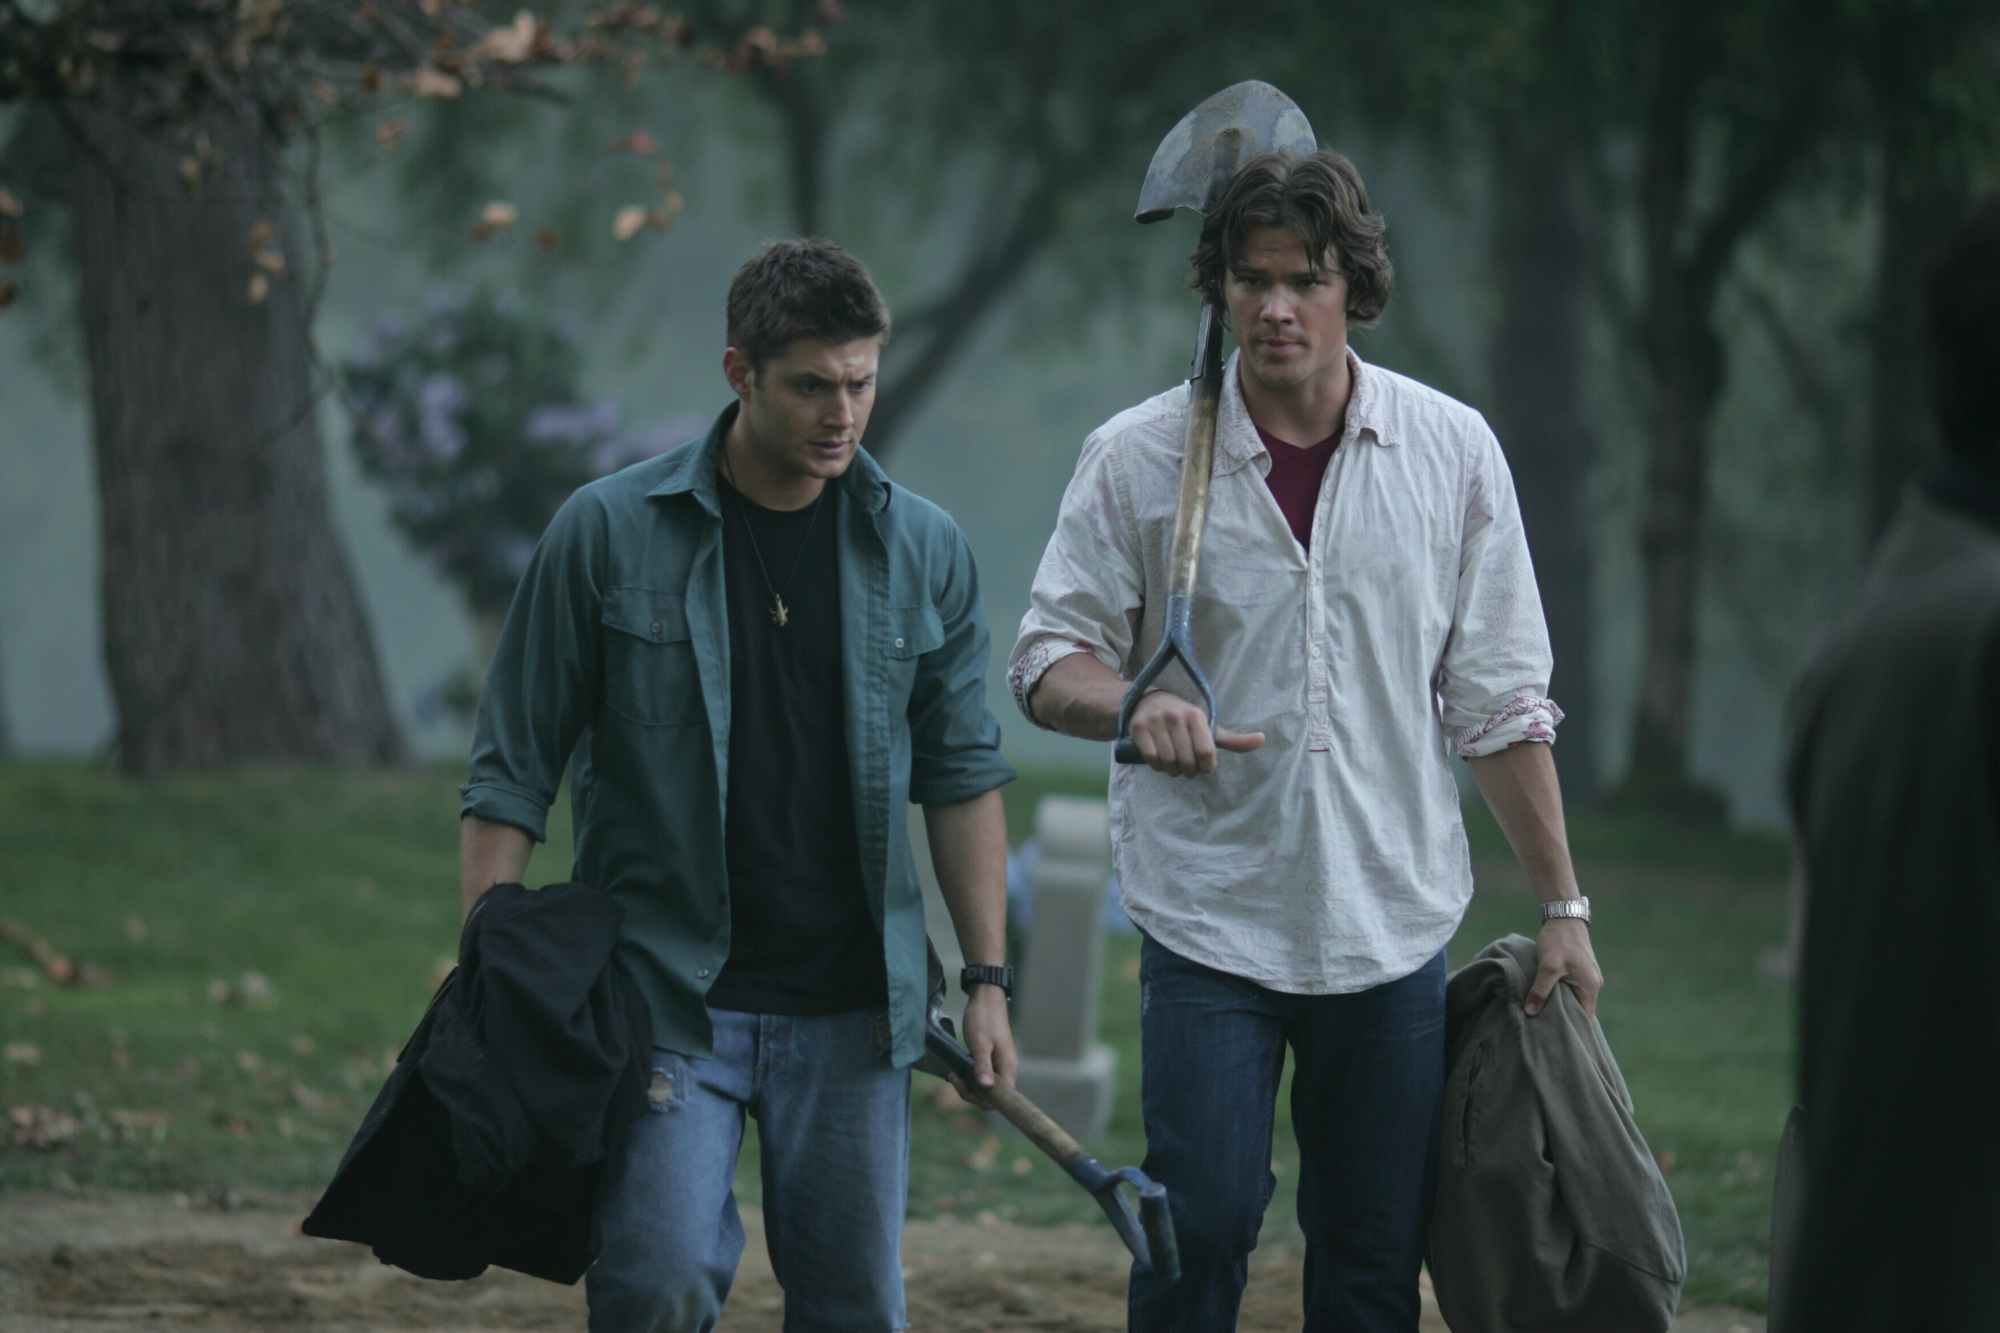 "Supernatural" Children Shouldn't Play with Dead Things